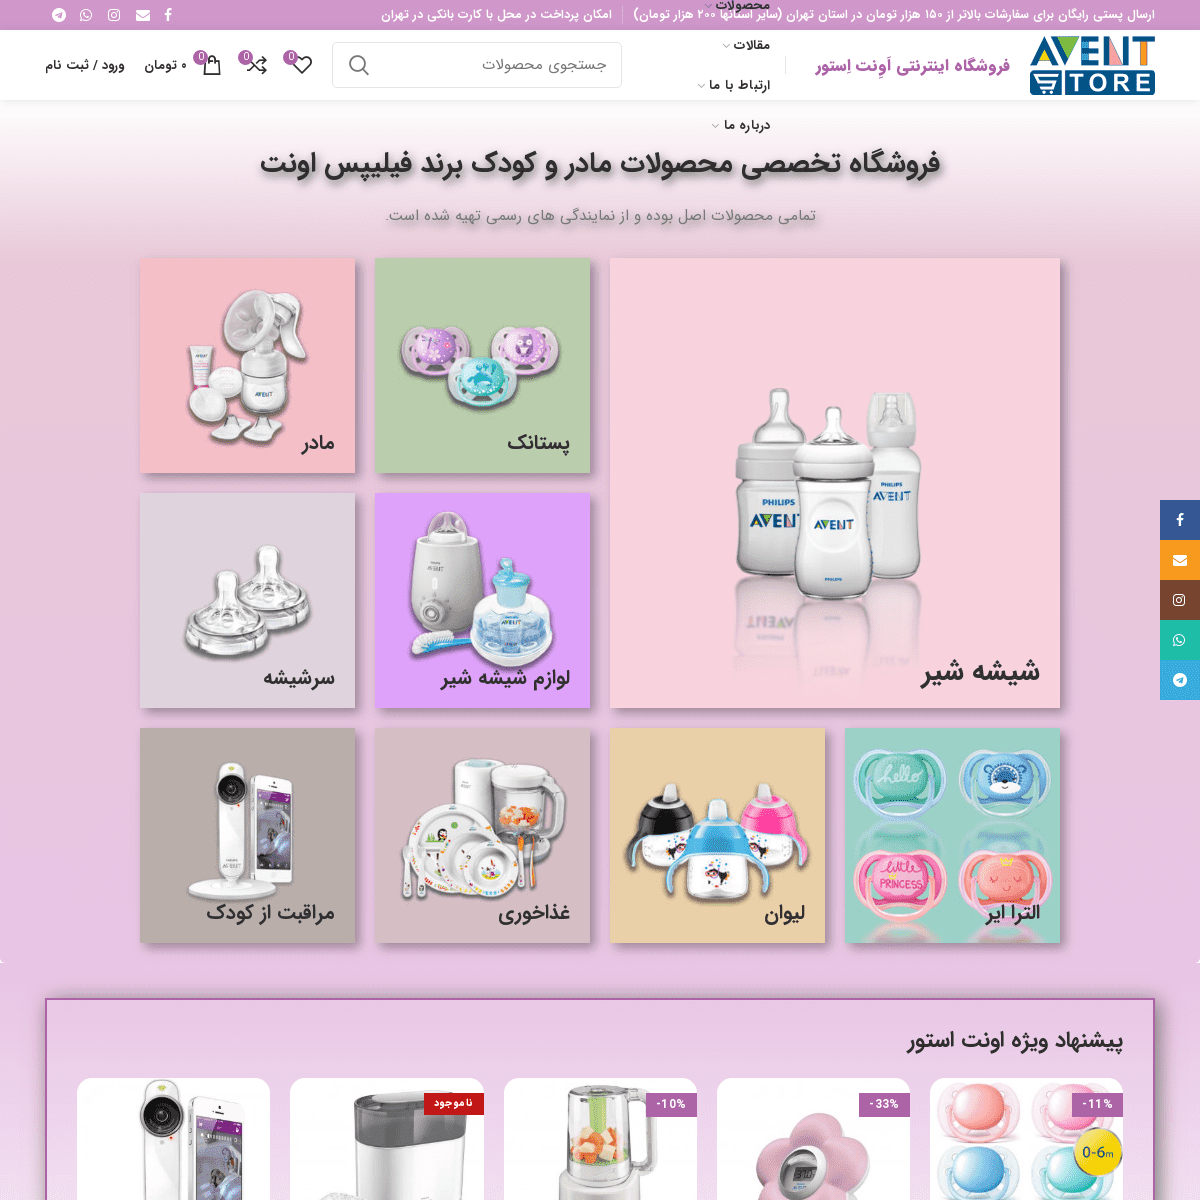 A complete backup of avent-store.com